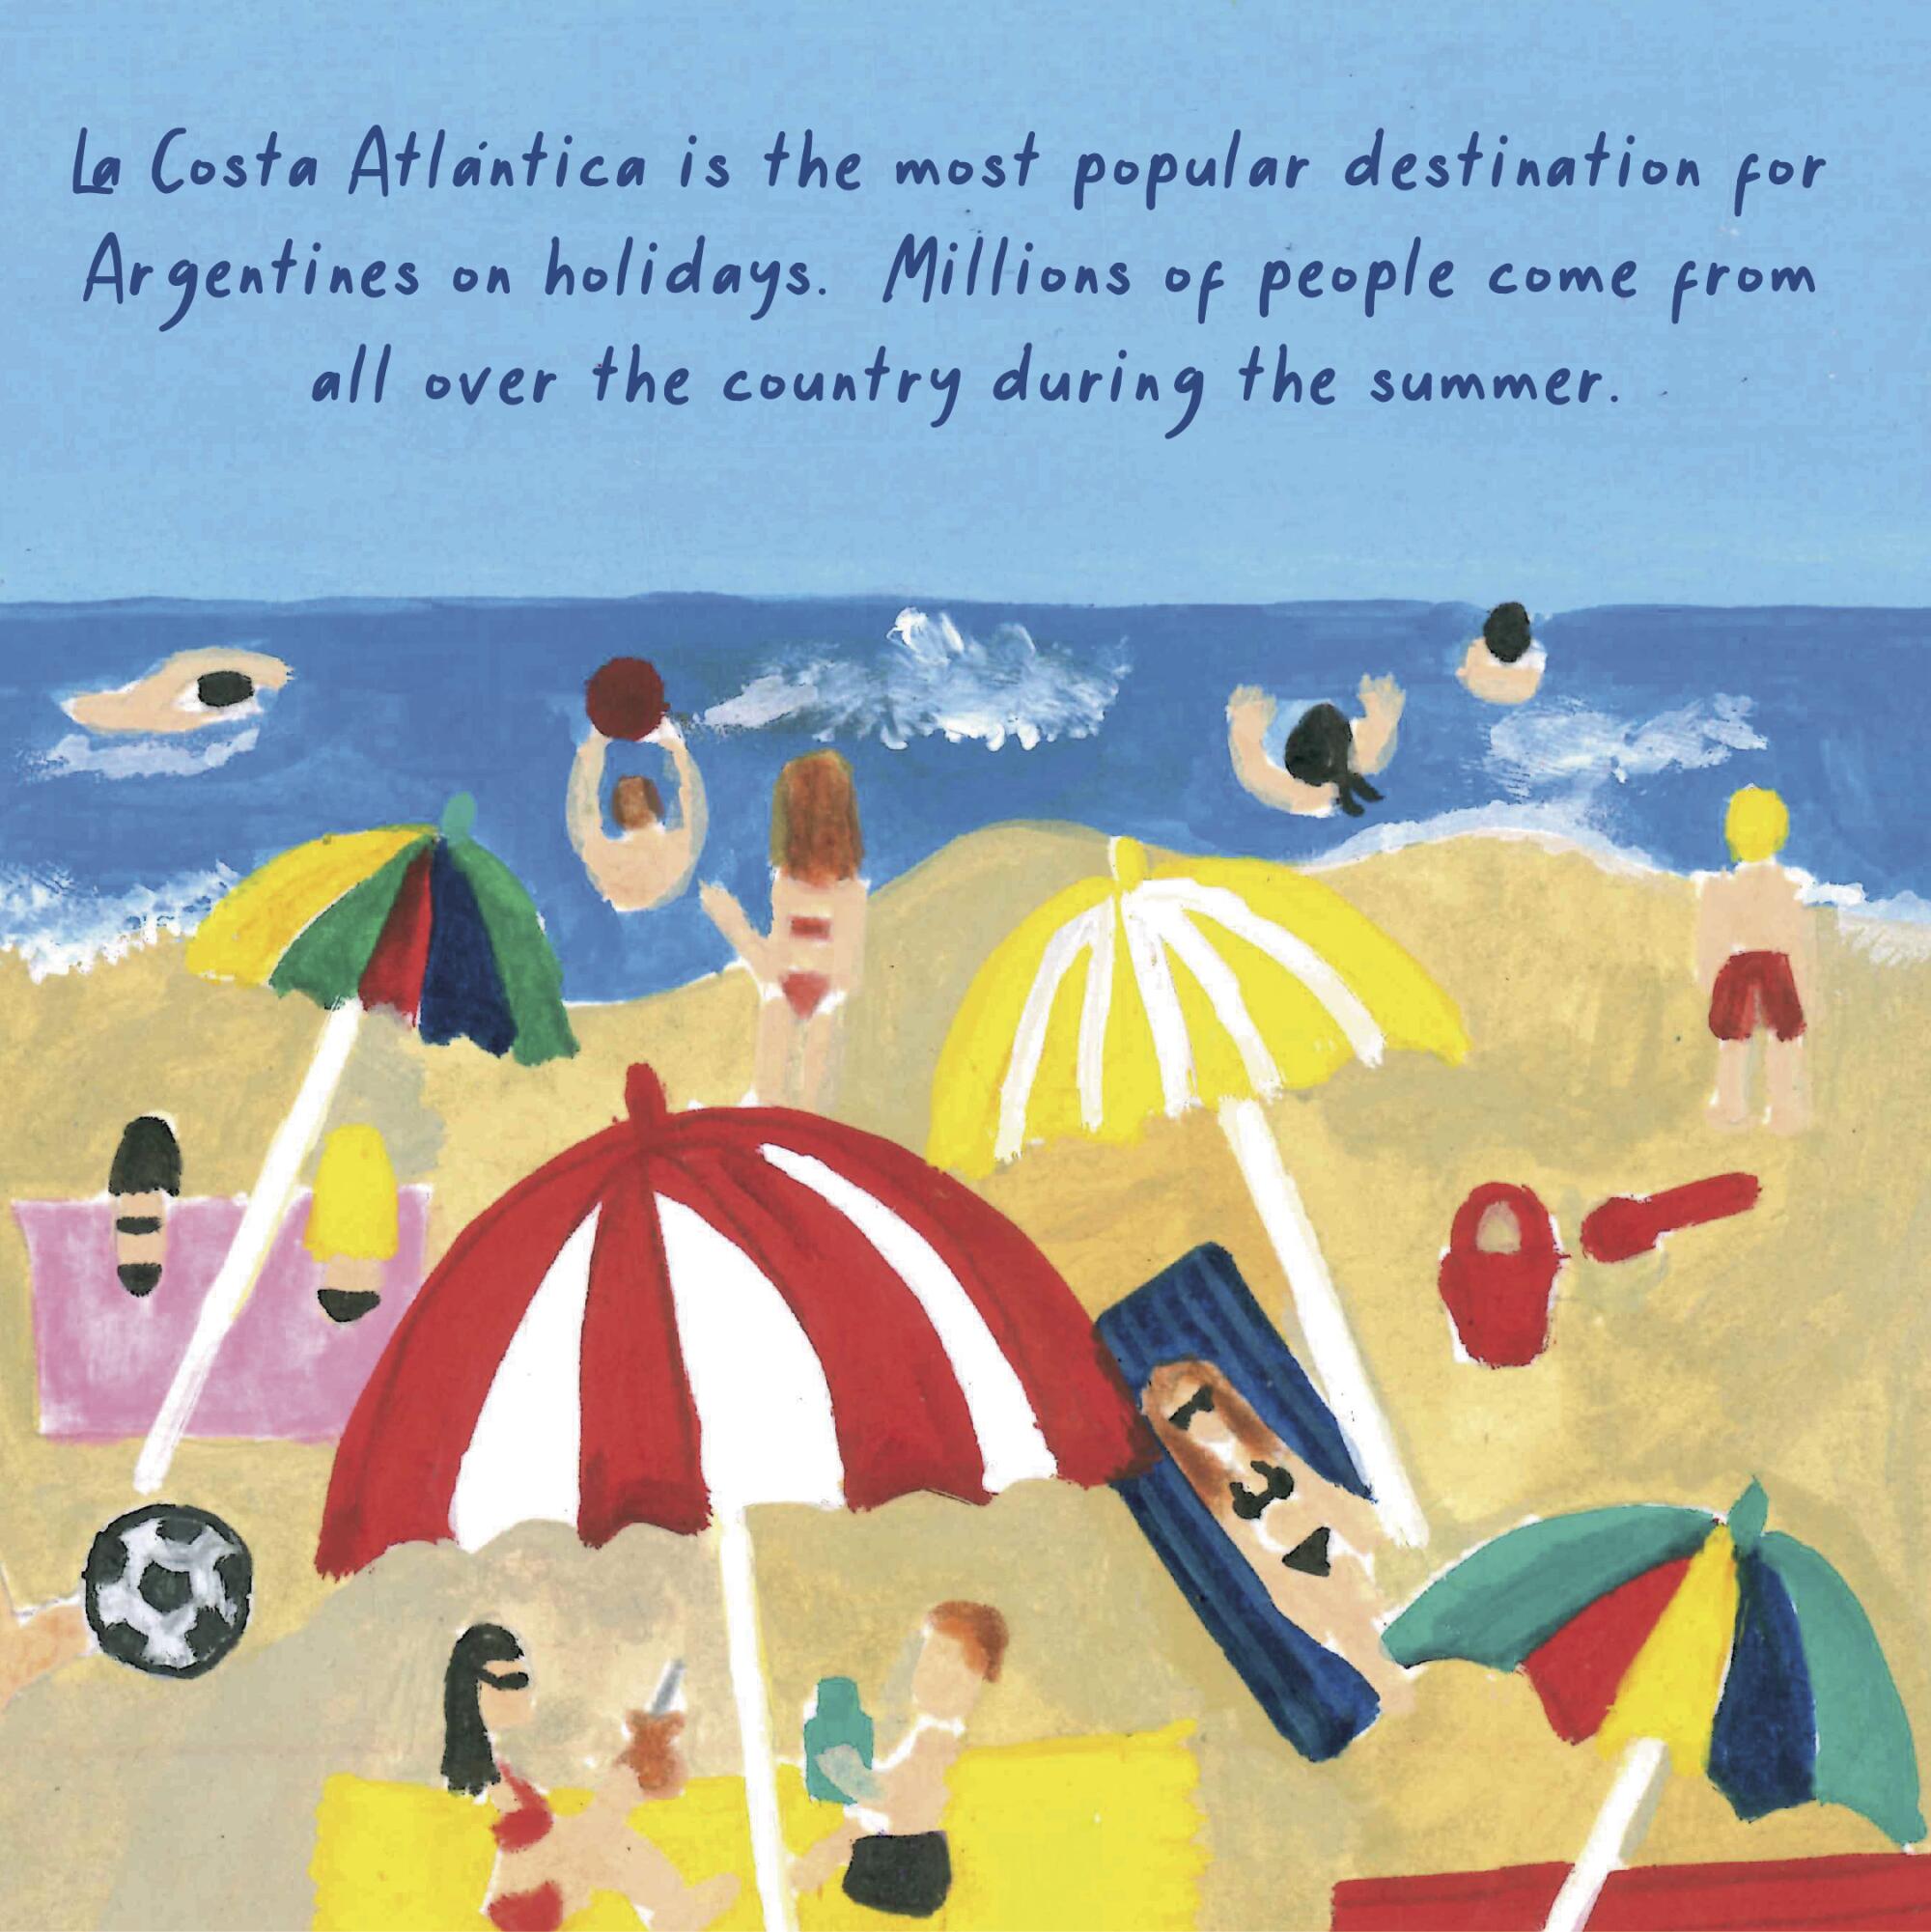 La Costa Atlantica is the most popular destination for Argentines on holidays. 